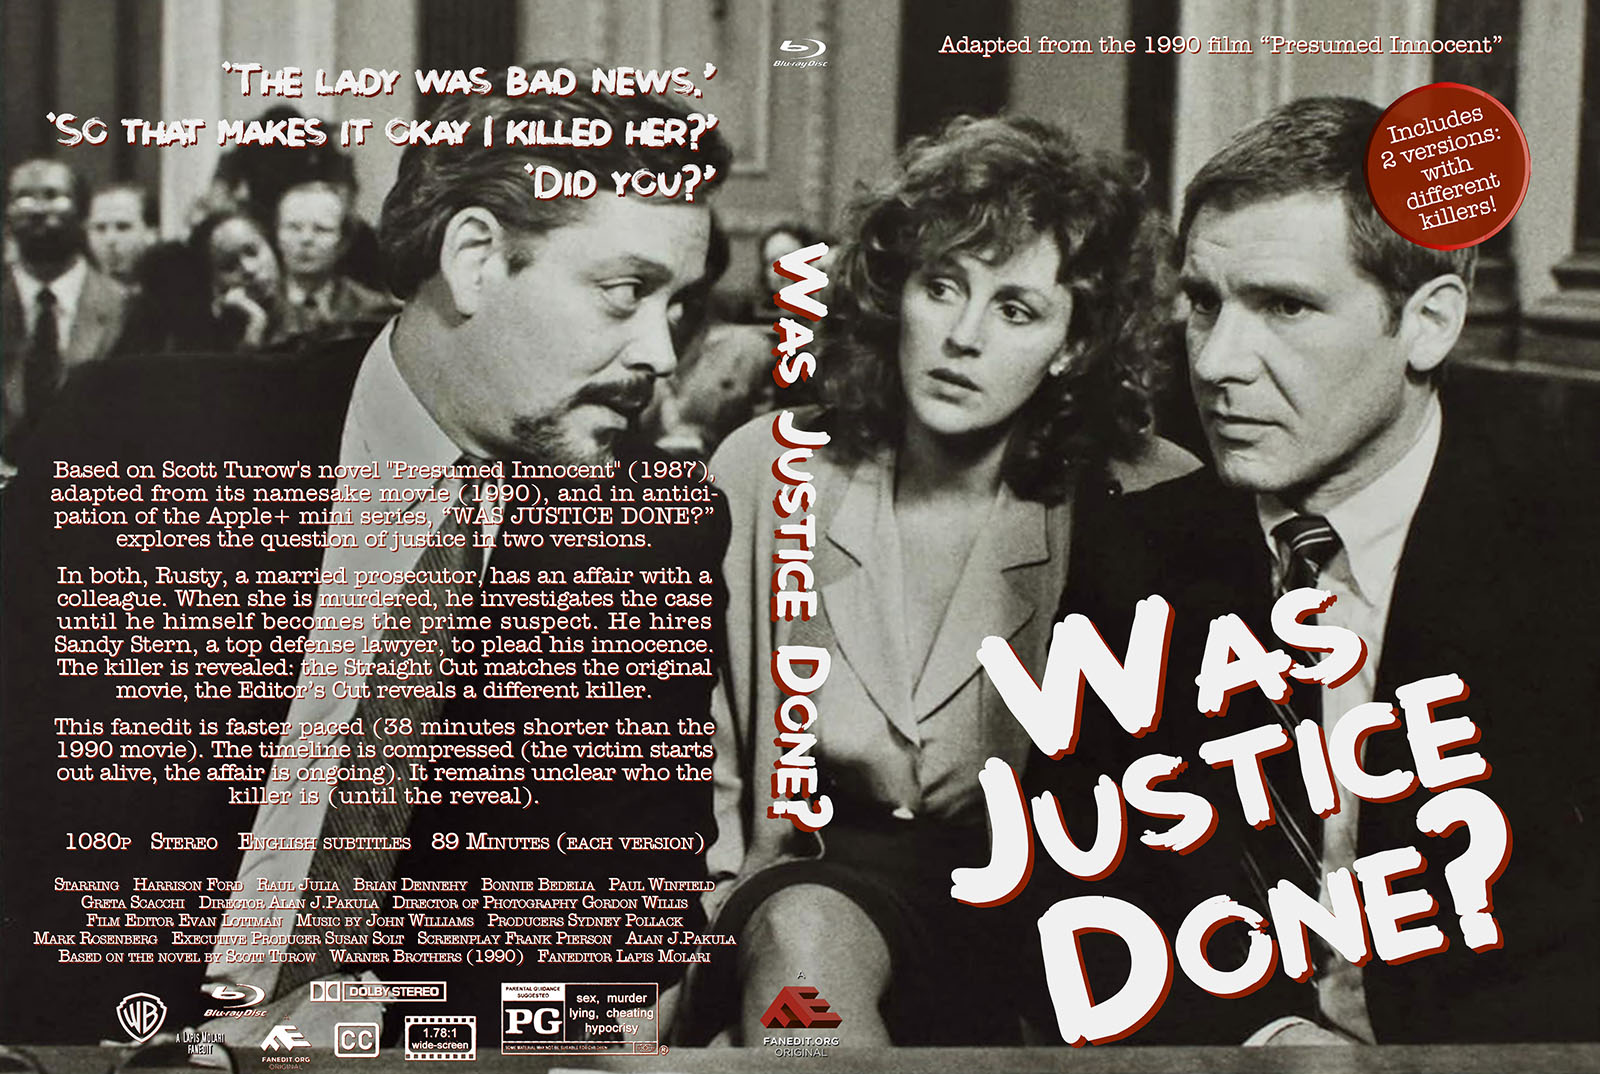 Was Justice Done - cover.jpg